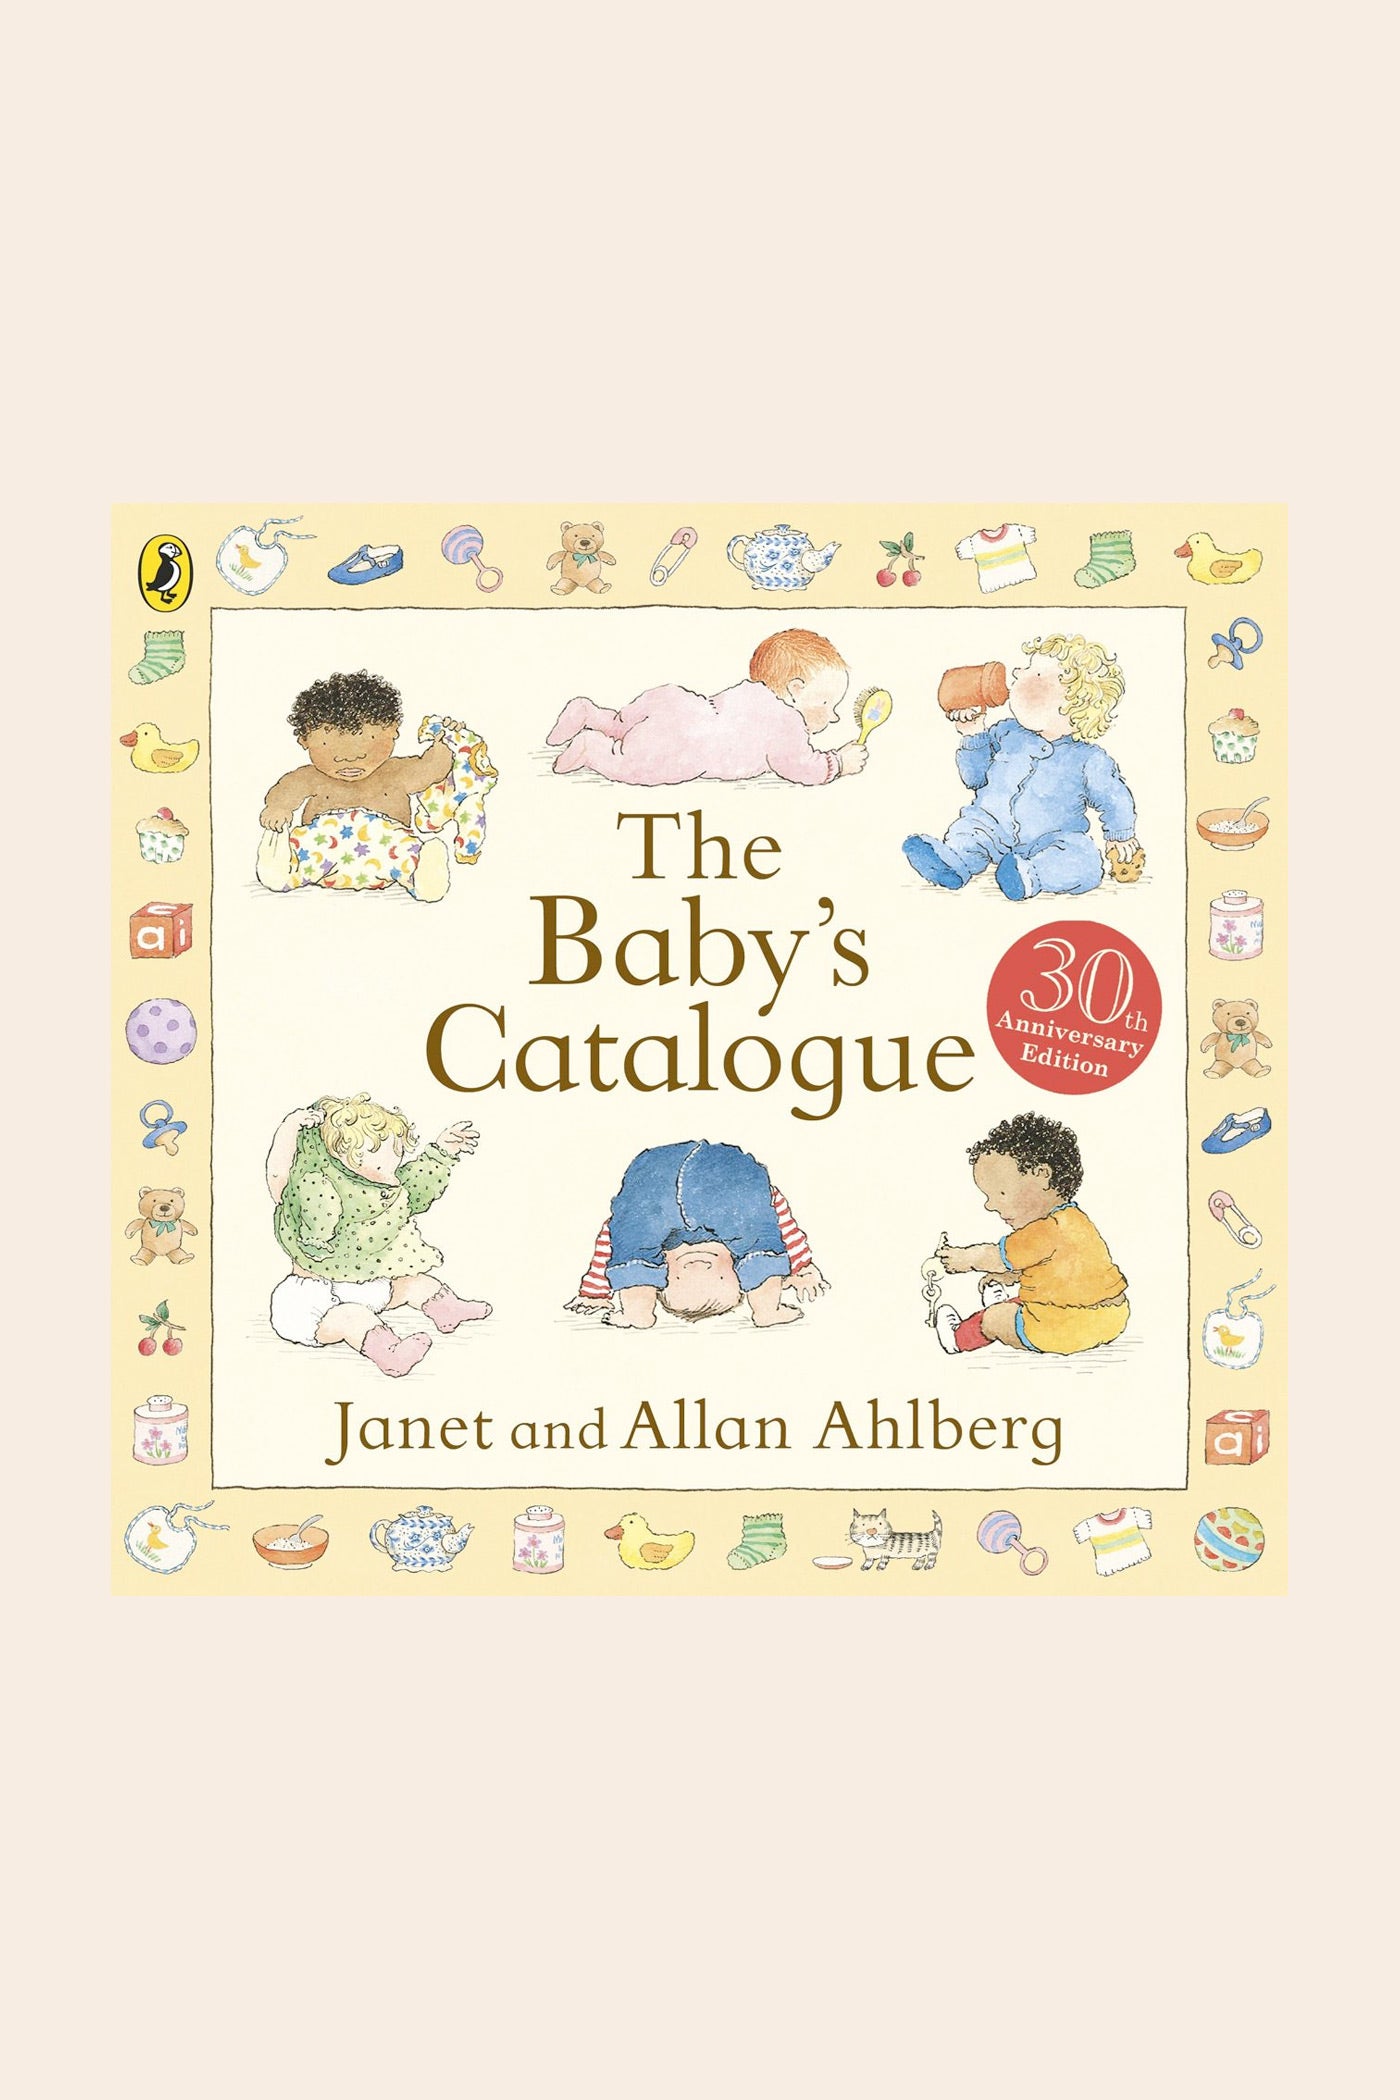 The Baby’s Catalogue